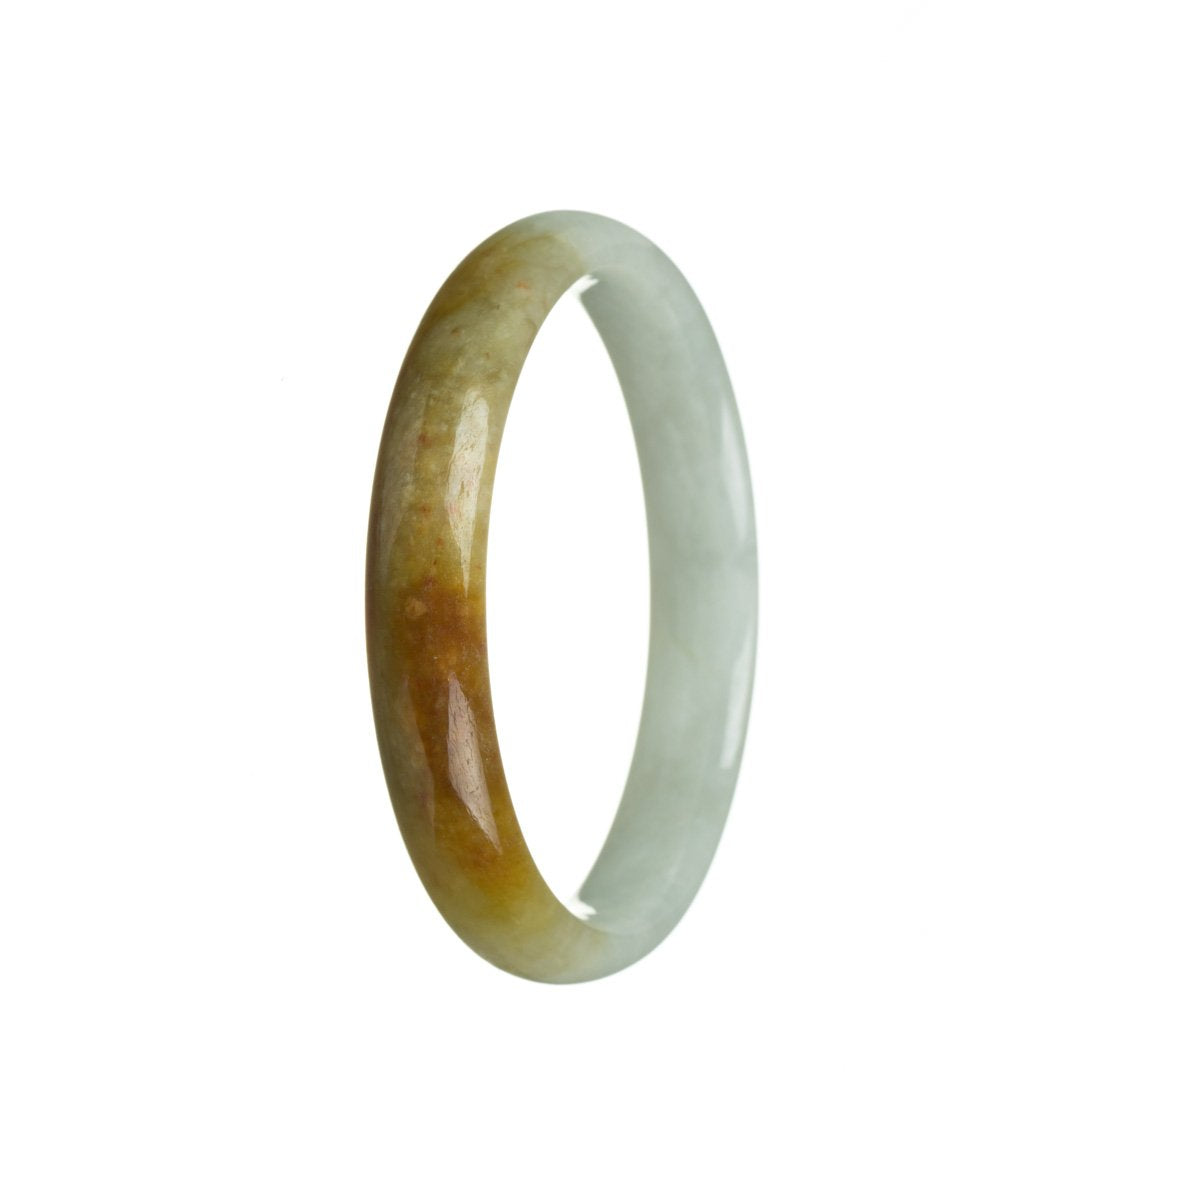 A close-up image of a pale green and brown jade bracelet with a half-moon shape, measuring 57mm. The bracelet is made from genuine Grade A Burma jade, known for its high quality. The brand name "MAYS™" is visible.